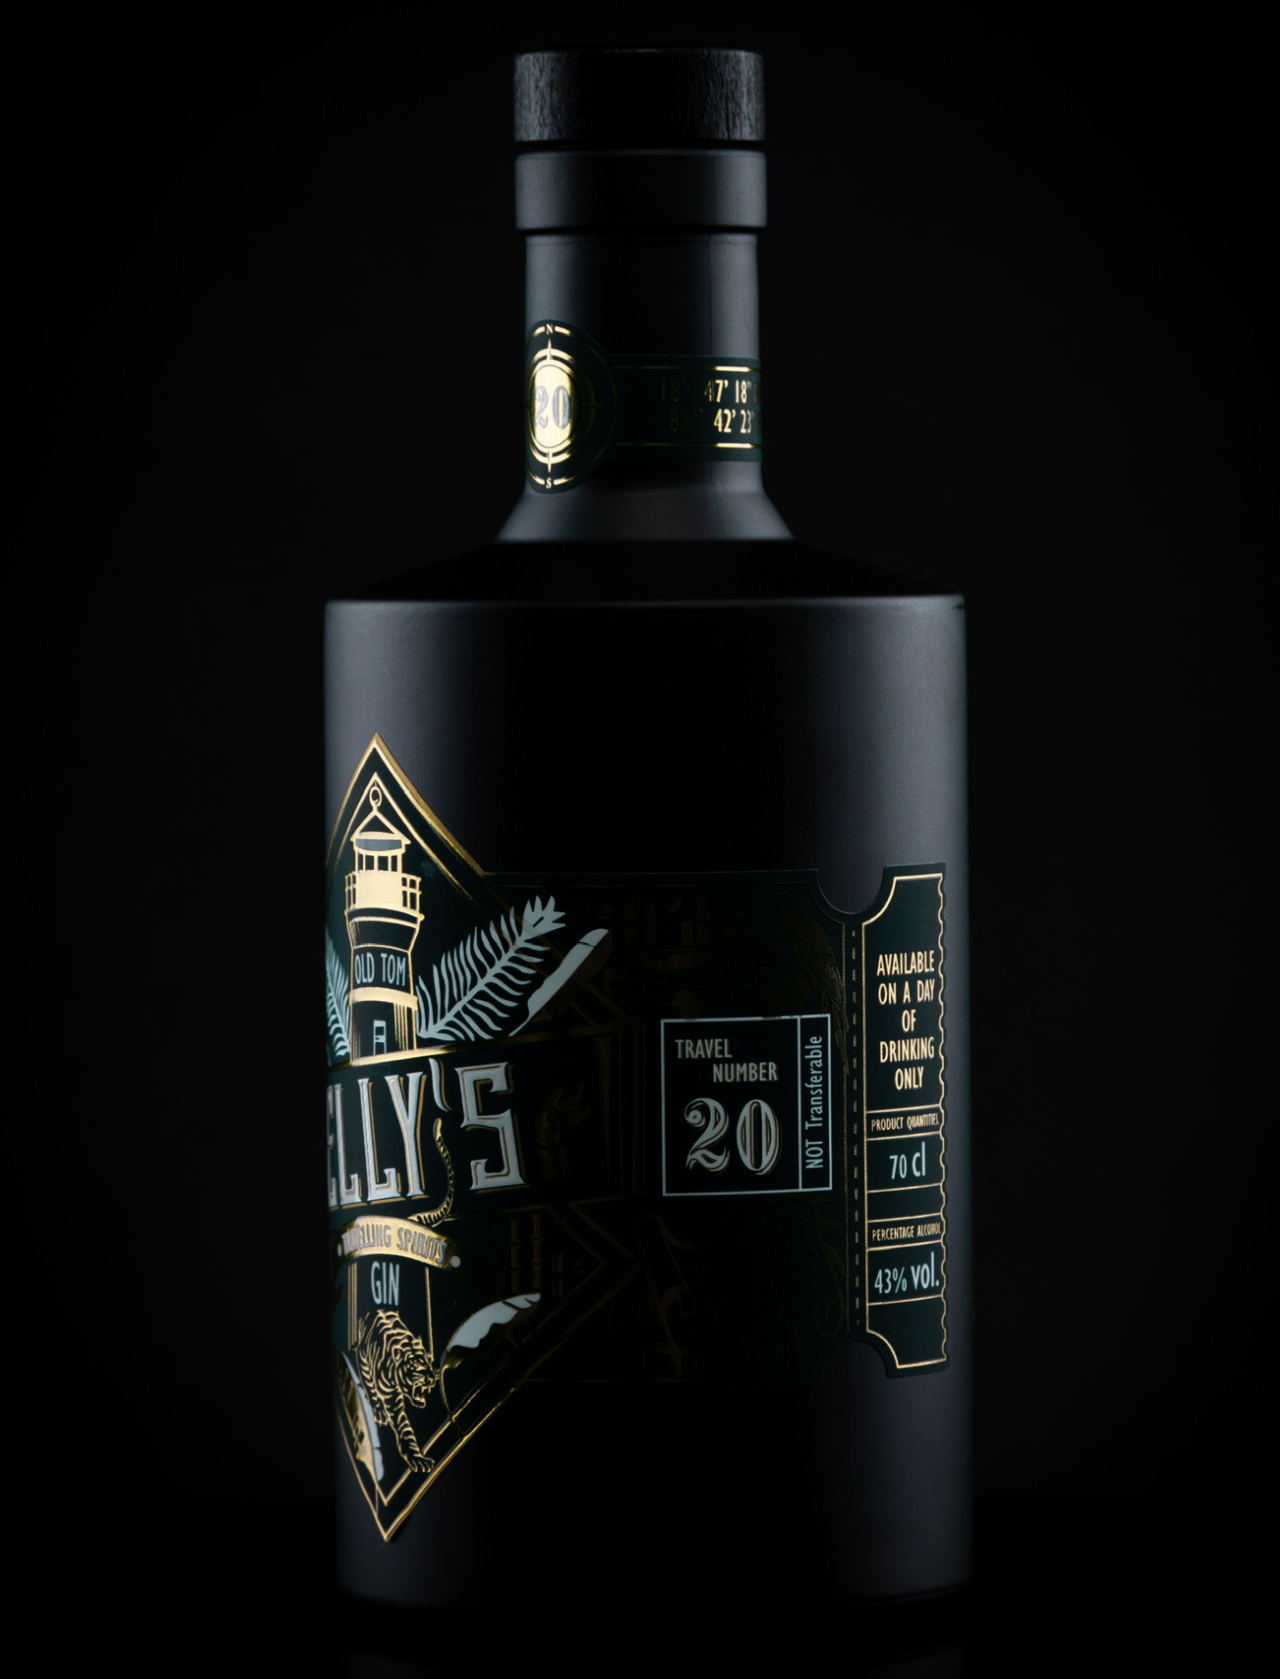 Elly's 20 | Old Tom Gin